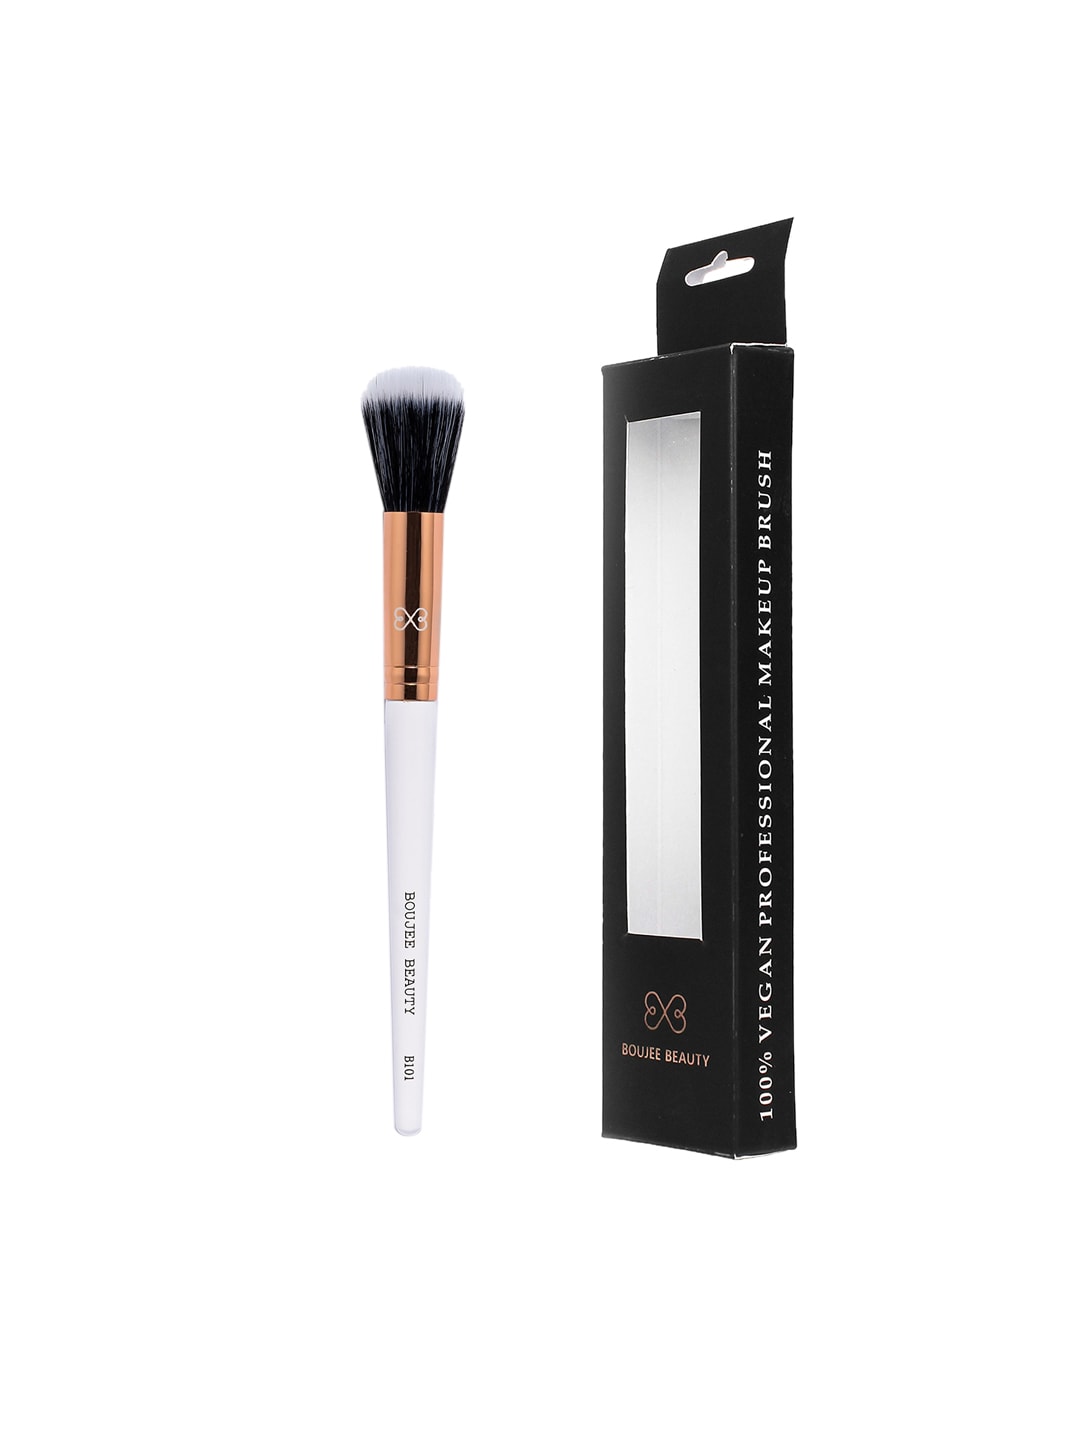 BOUJEE BEAUTY White Duo-Fibre Foundation Brush - B101 Price in India